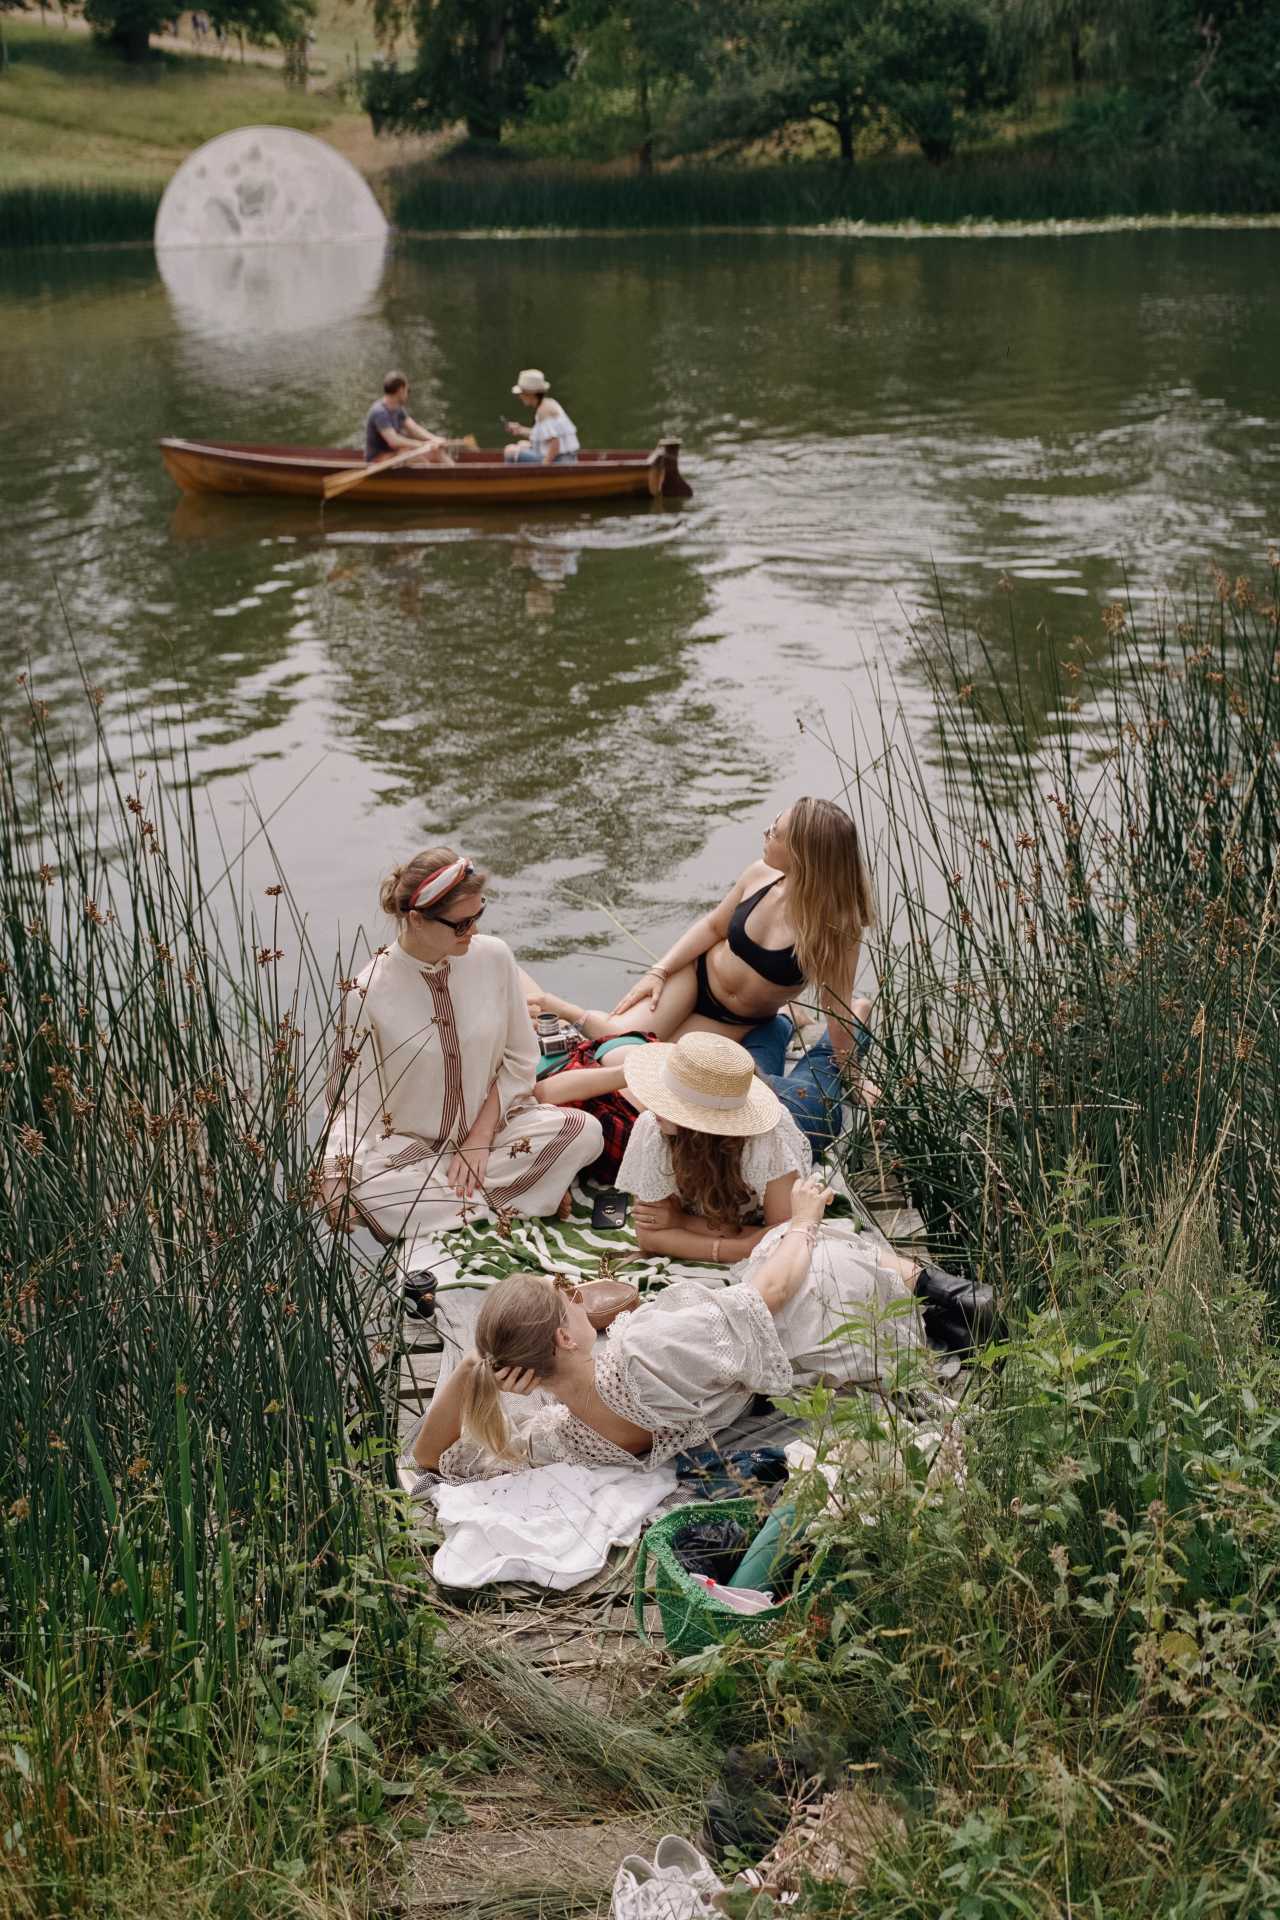 Relaxing by the lake at Wilderness festival